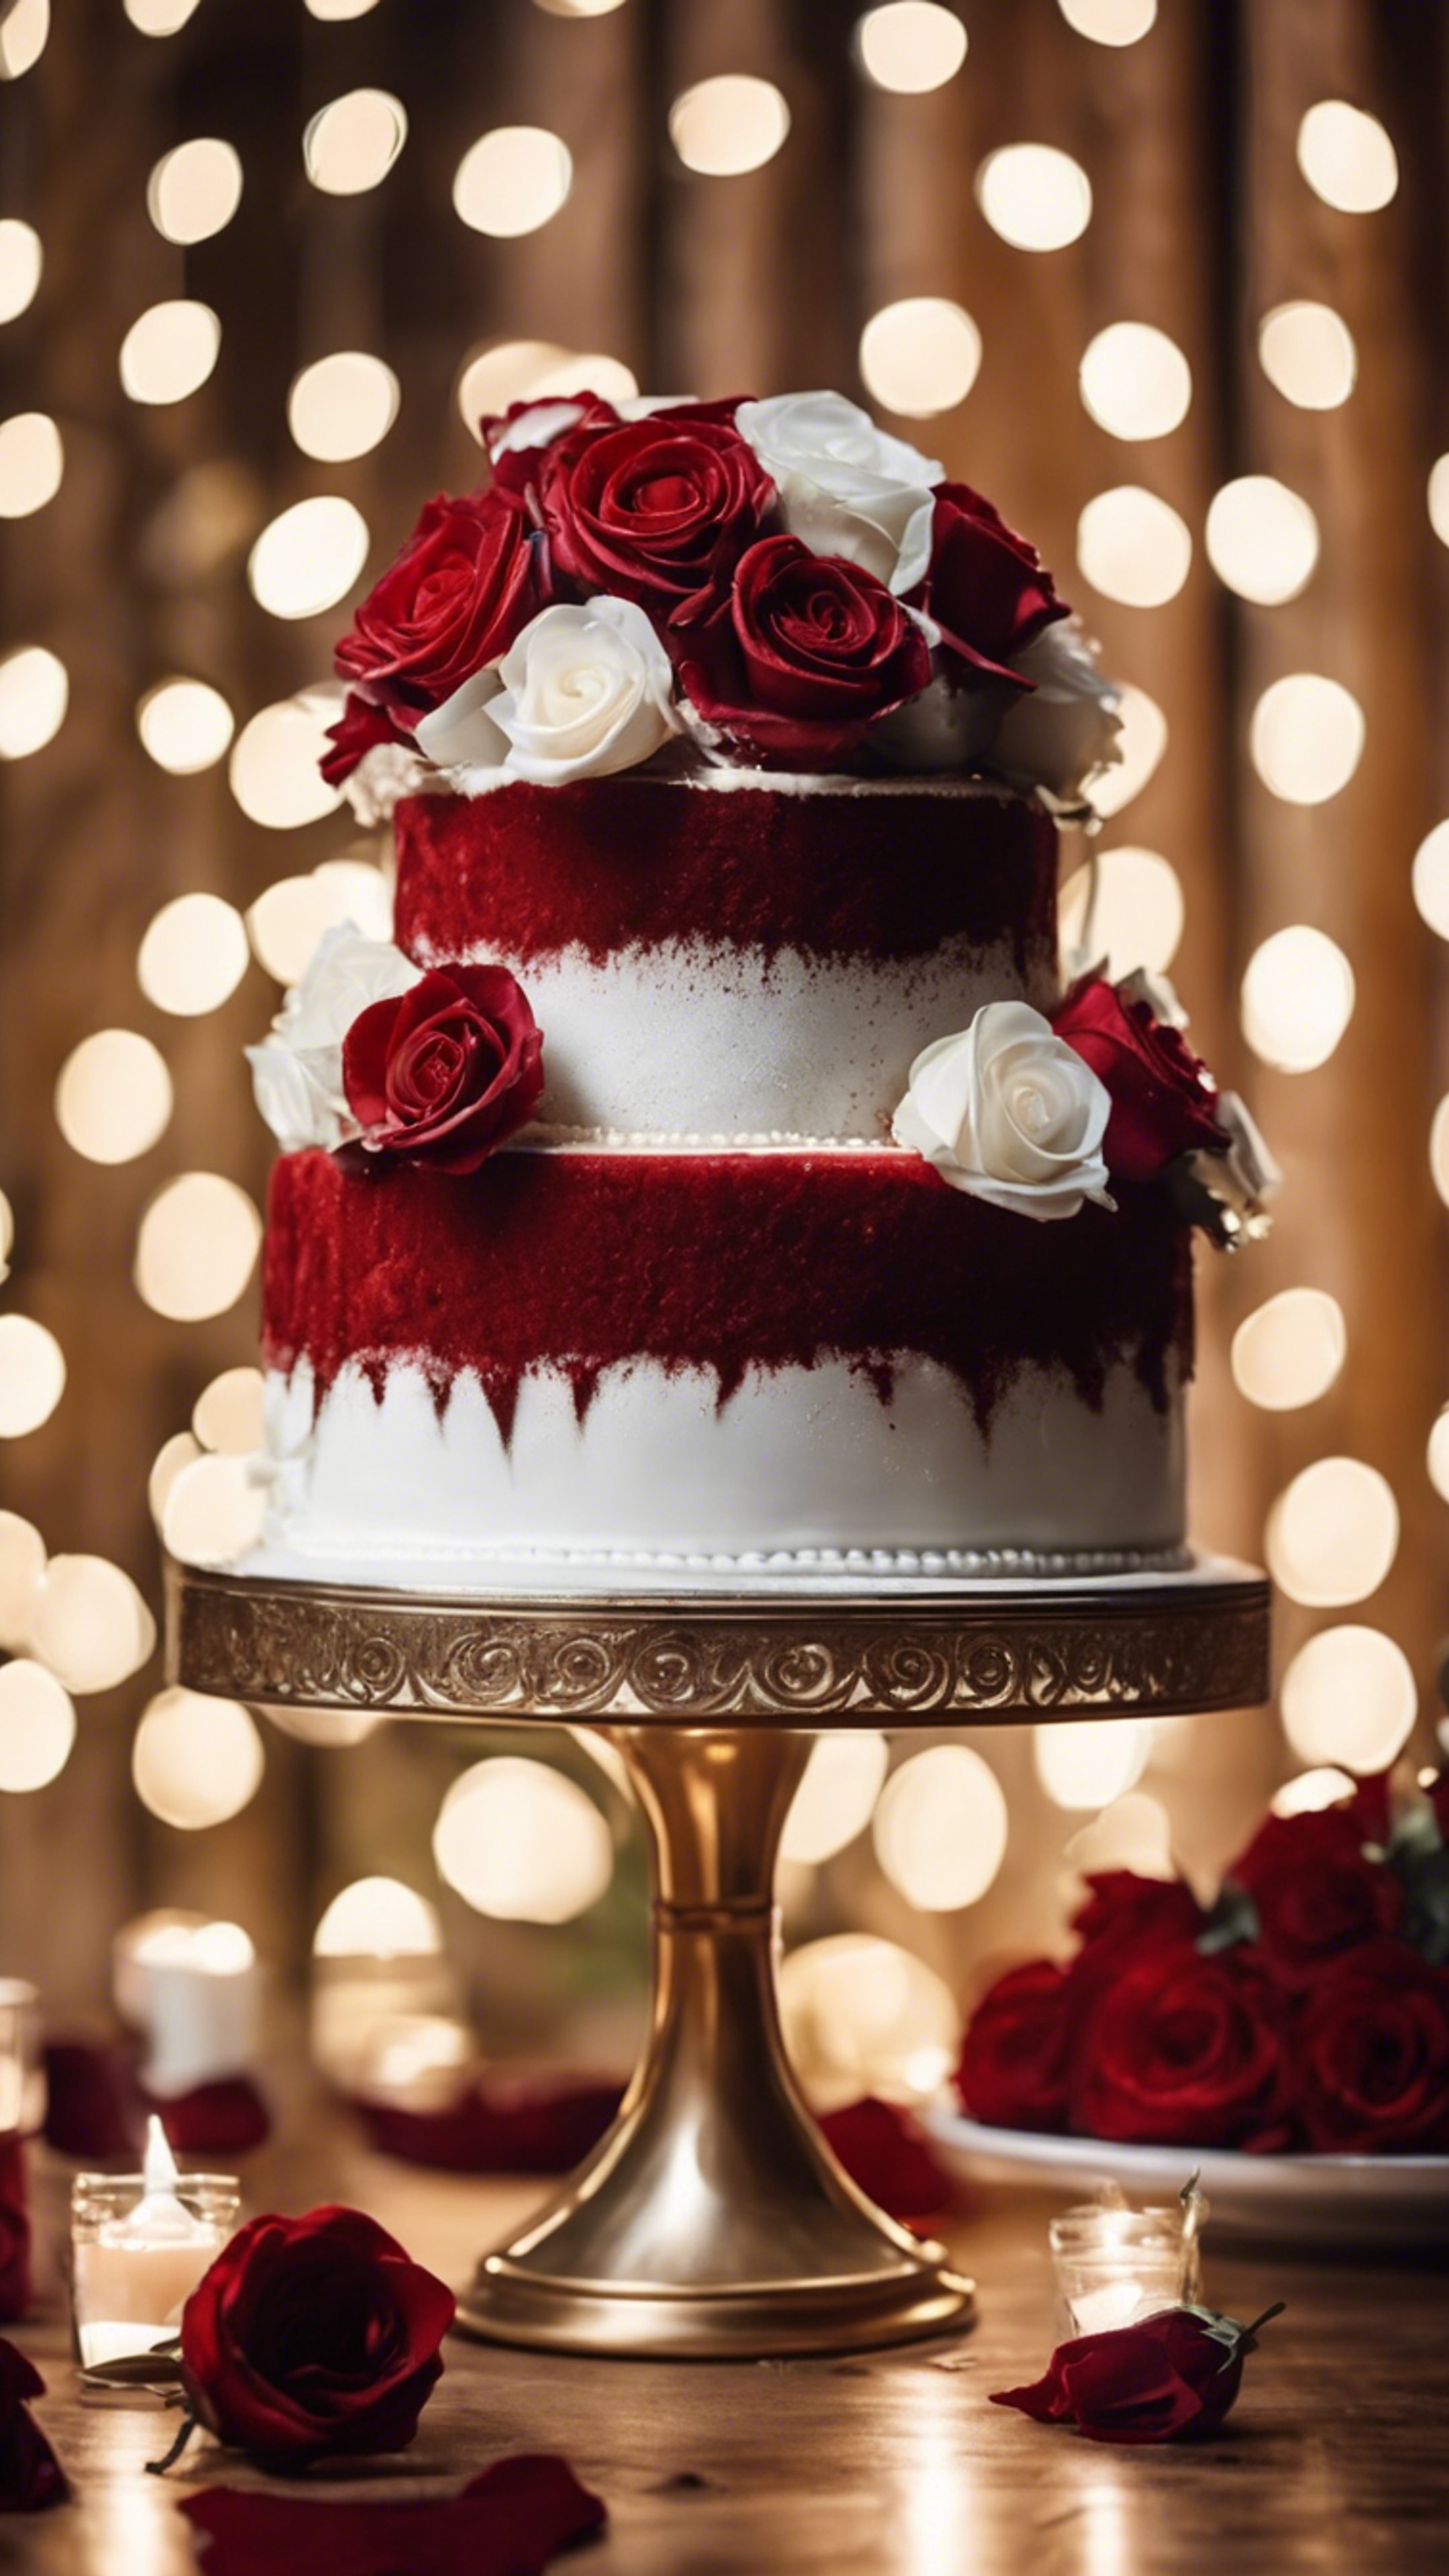 Three-tiered red velvet wedding cake adorned with white roses, against a backdrop of twinkling fairy lights. کاغذ دیواری[b48557e9e8f84a90b888]